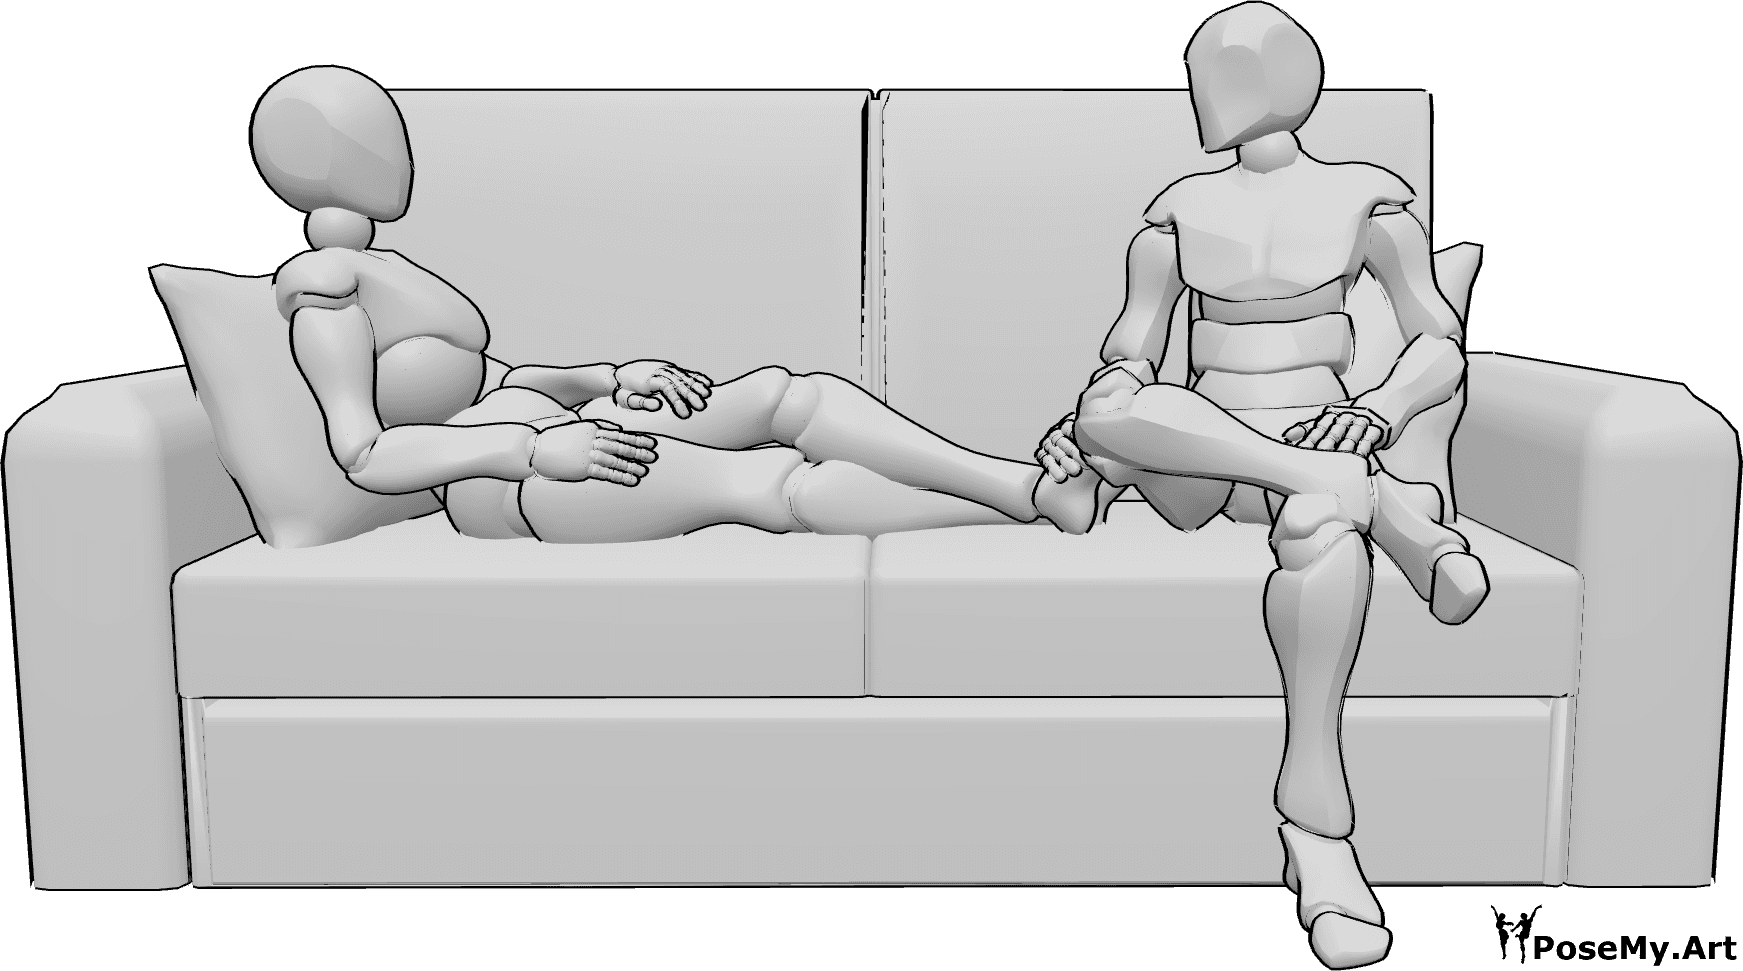 Pose Reference- Female male sitting pose - Female is lying on the couch, the male is sitting next to her, they are looking at each other